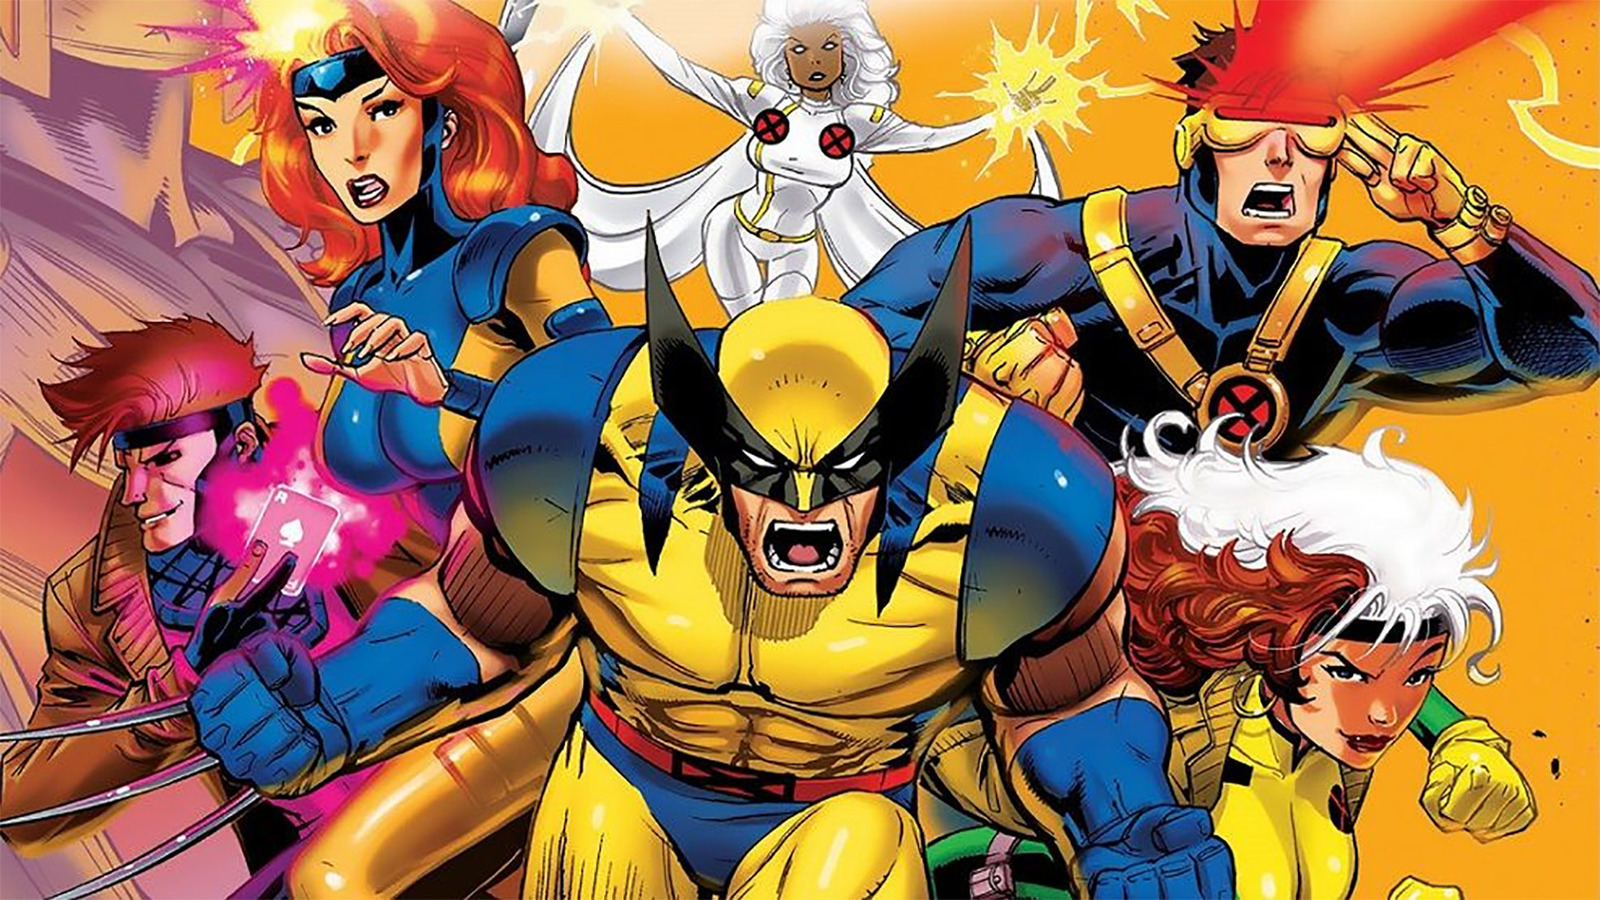 Cool Stuff: Hasbro Unveils X-Men '97 Marvel Legends Action Figures With Updated Animated Looks